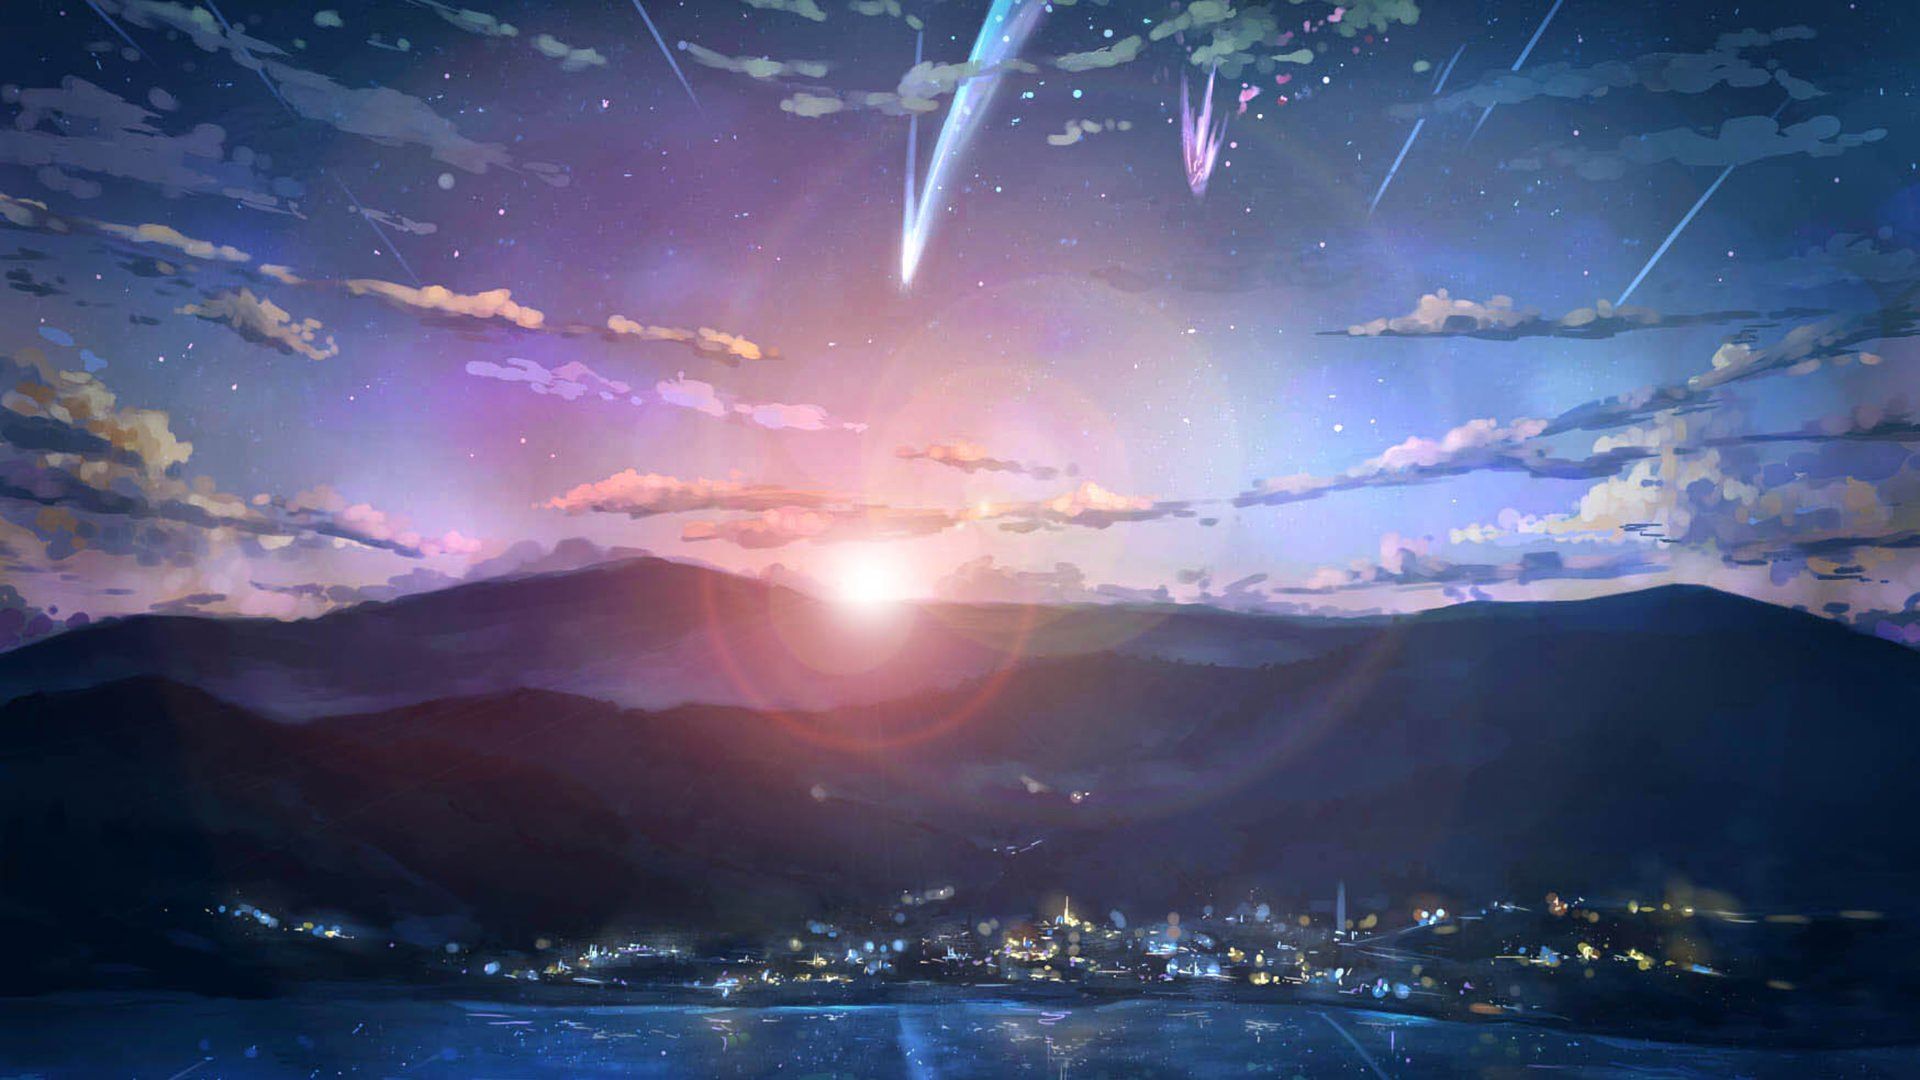 Your Name Anime Landscape Wallpaper Free Your Name Anime Landscape Background